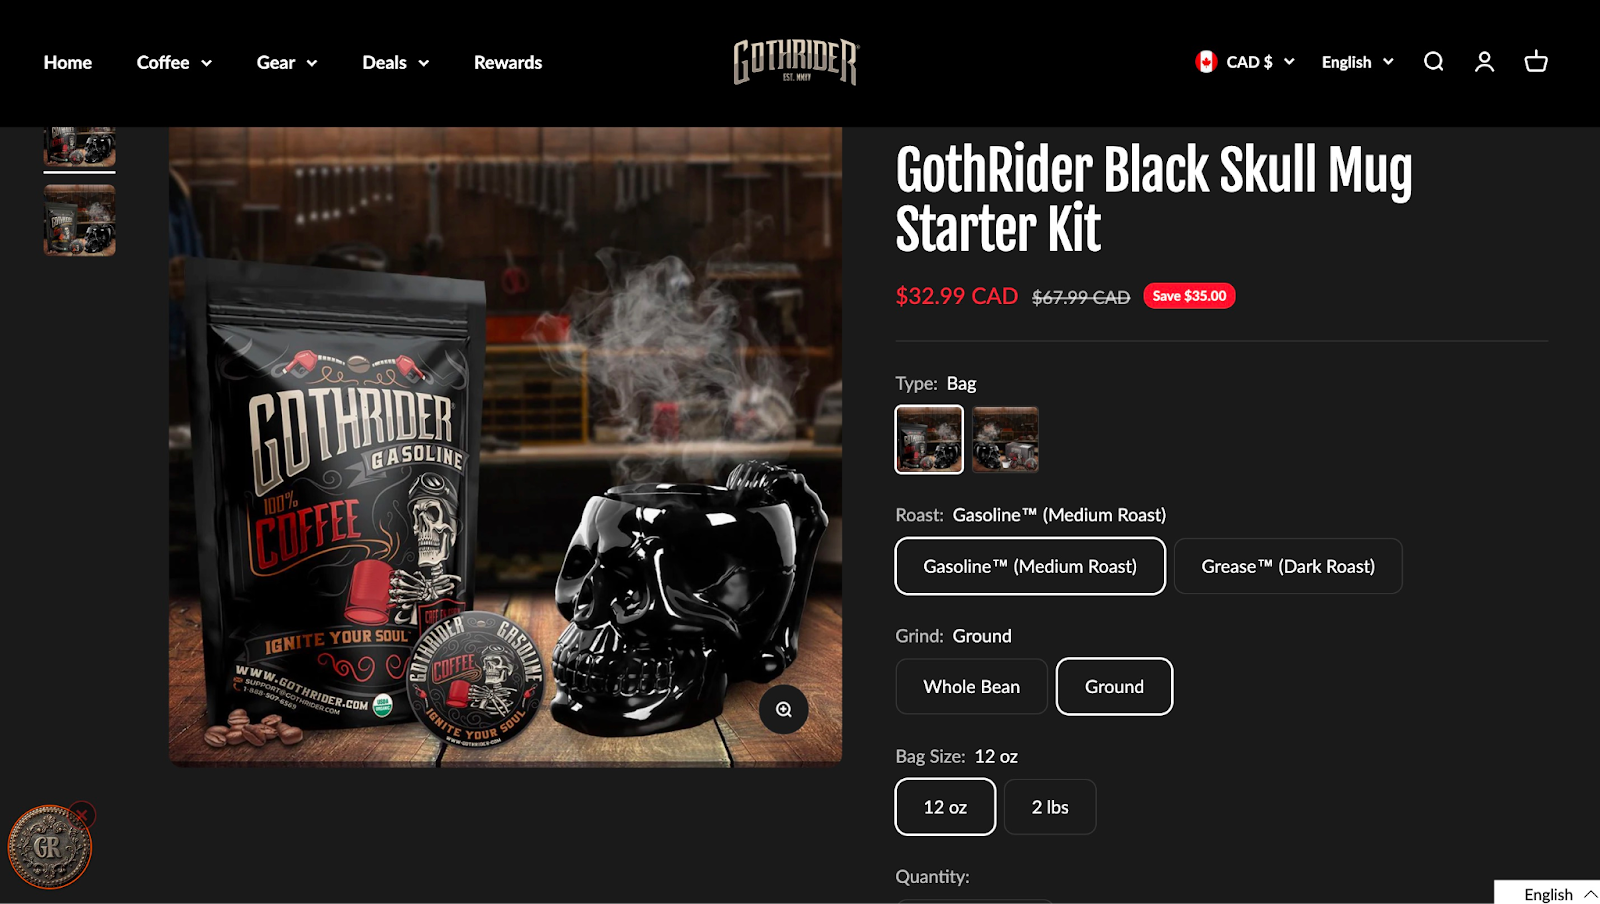 Gothrider Coffee Brews Up Simplified Shipping and Inventory Operations with Simple Bundles